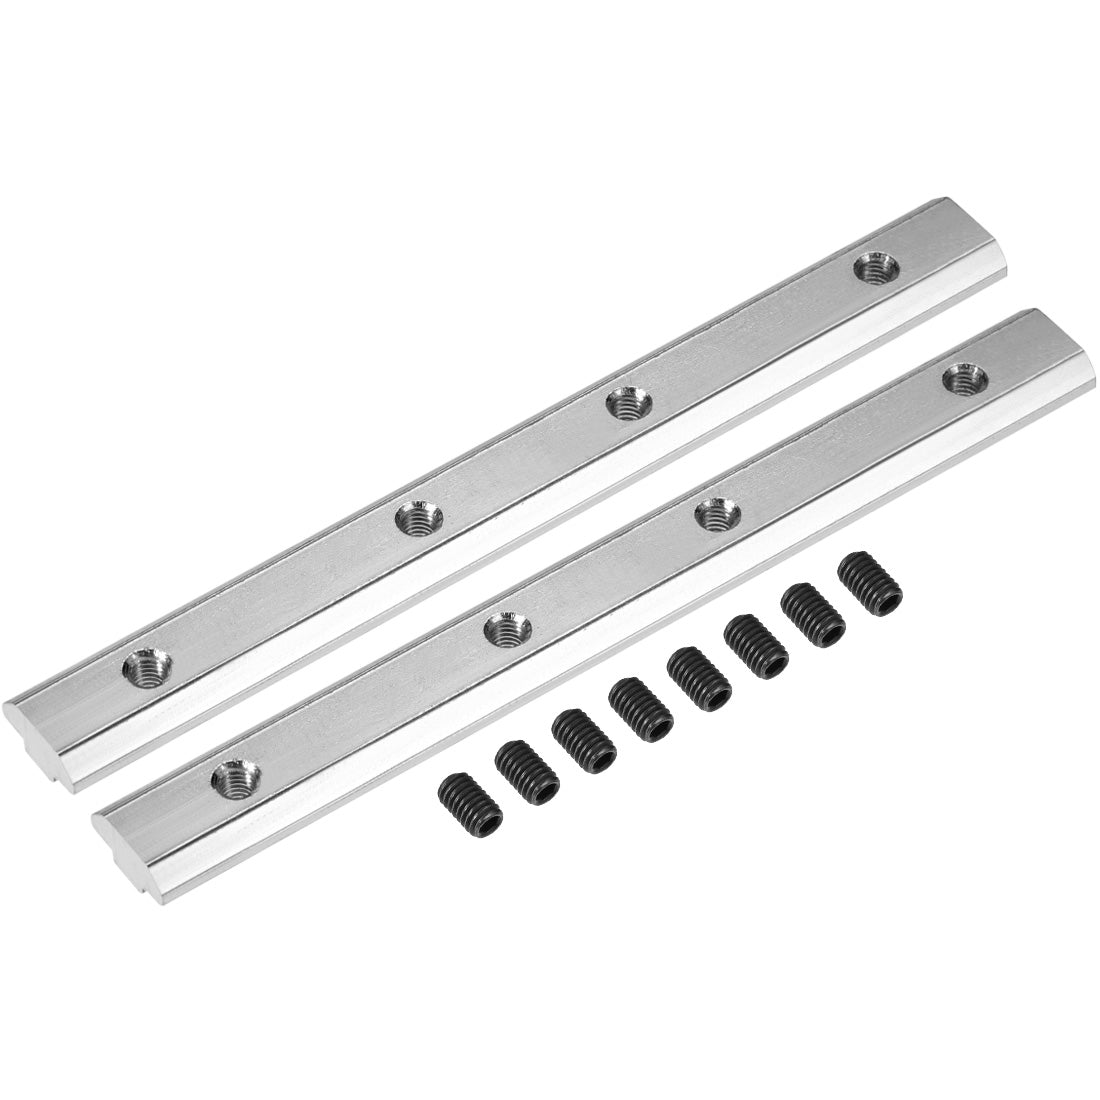 uxcell Uxcell Straight Line Connector, 7 Inch Joint Bracket with Screws for 4040 Series T Slot 8mm Aluminum Extrusion Profile, 2 Pcs